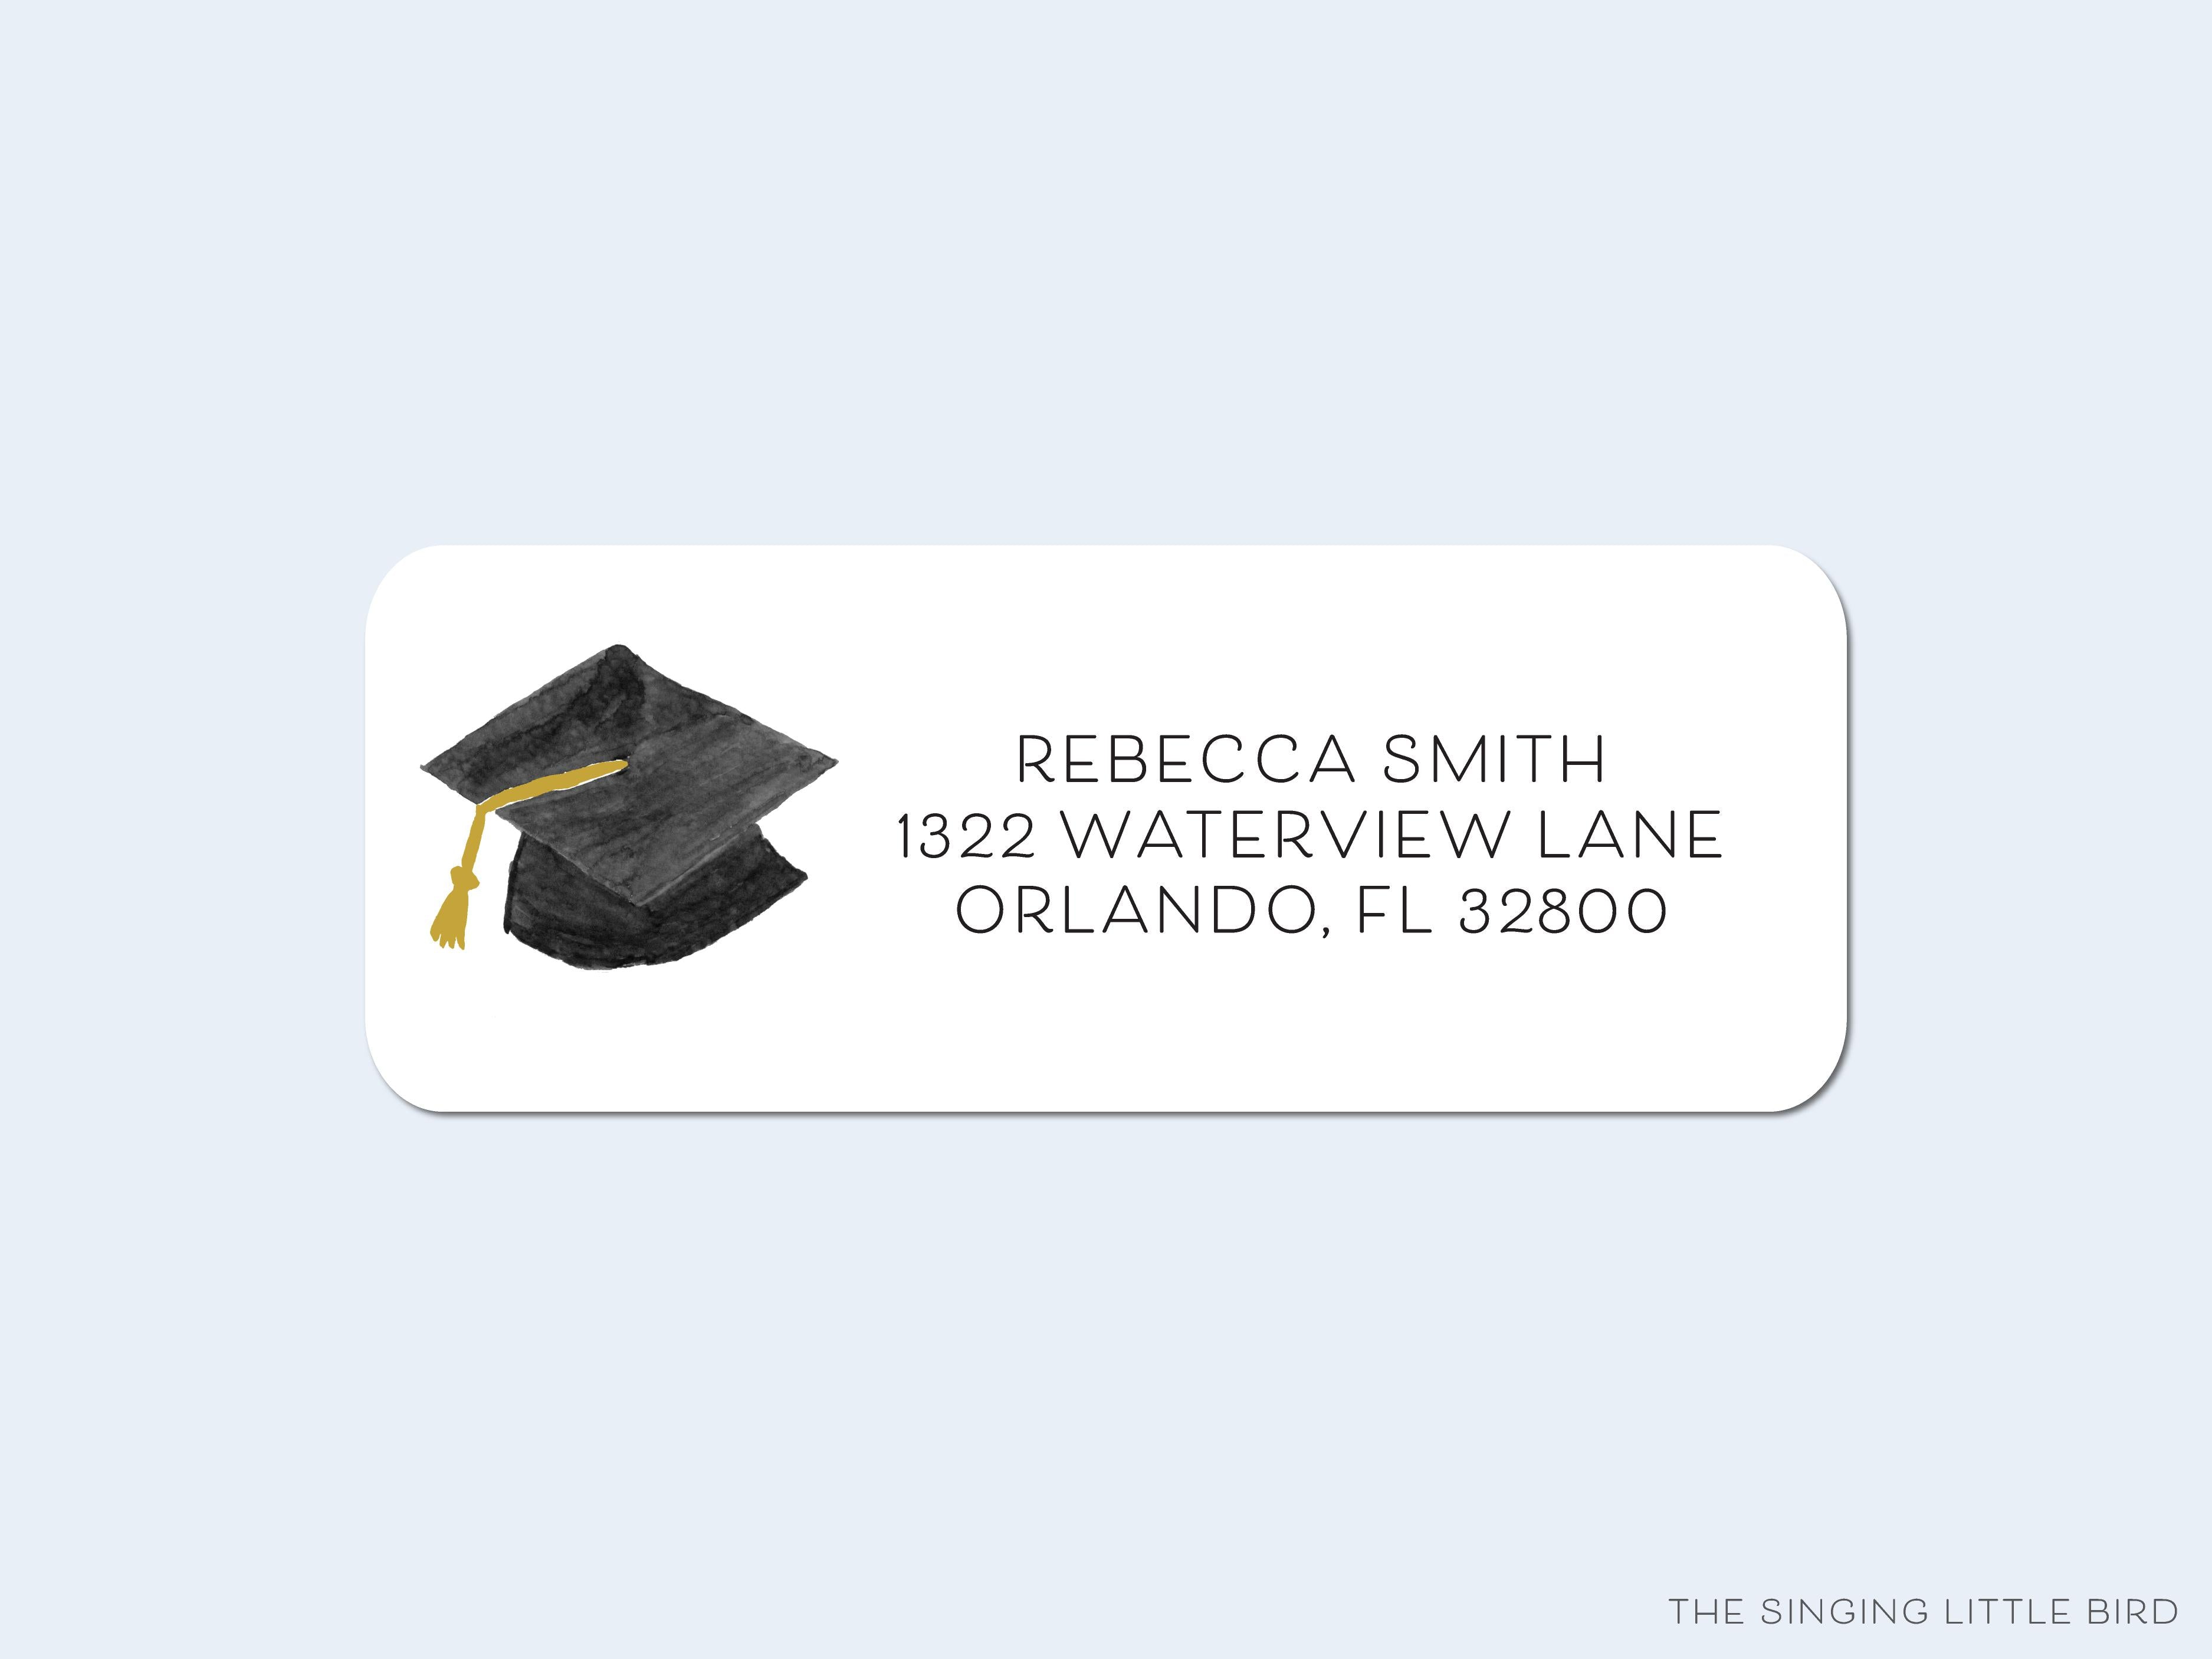 Graduation Cap Return Address Labels-These personalized return address labels are 2.625" x 1" and feature our hand-painted watercolor Graduation Cap, printed in the USA on beautiful matte finish labels. These make great gifts for yourself or the graduate in your life.-The Singing Little Bird